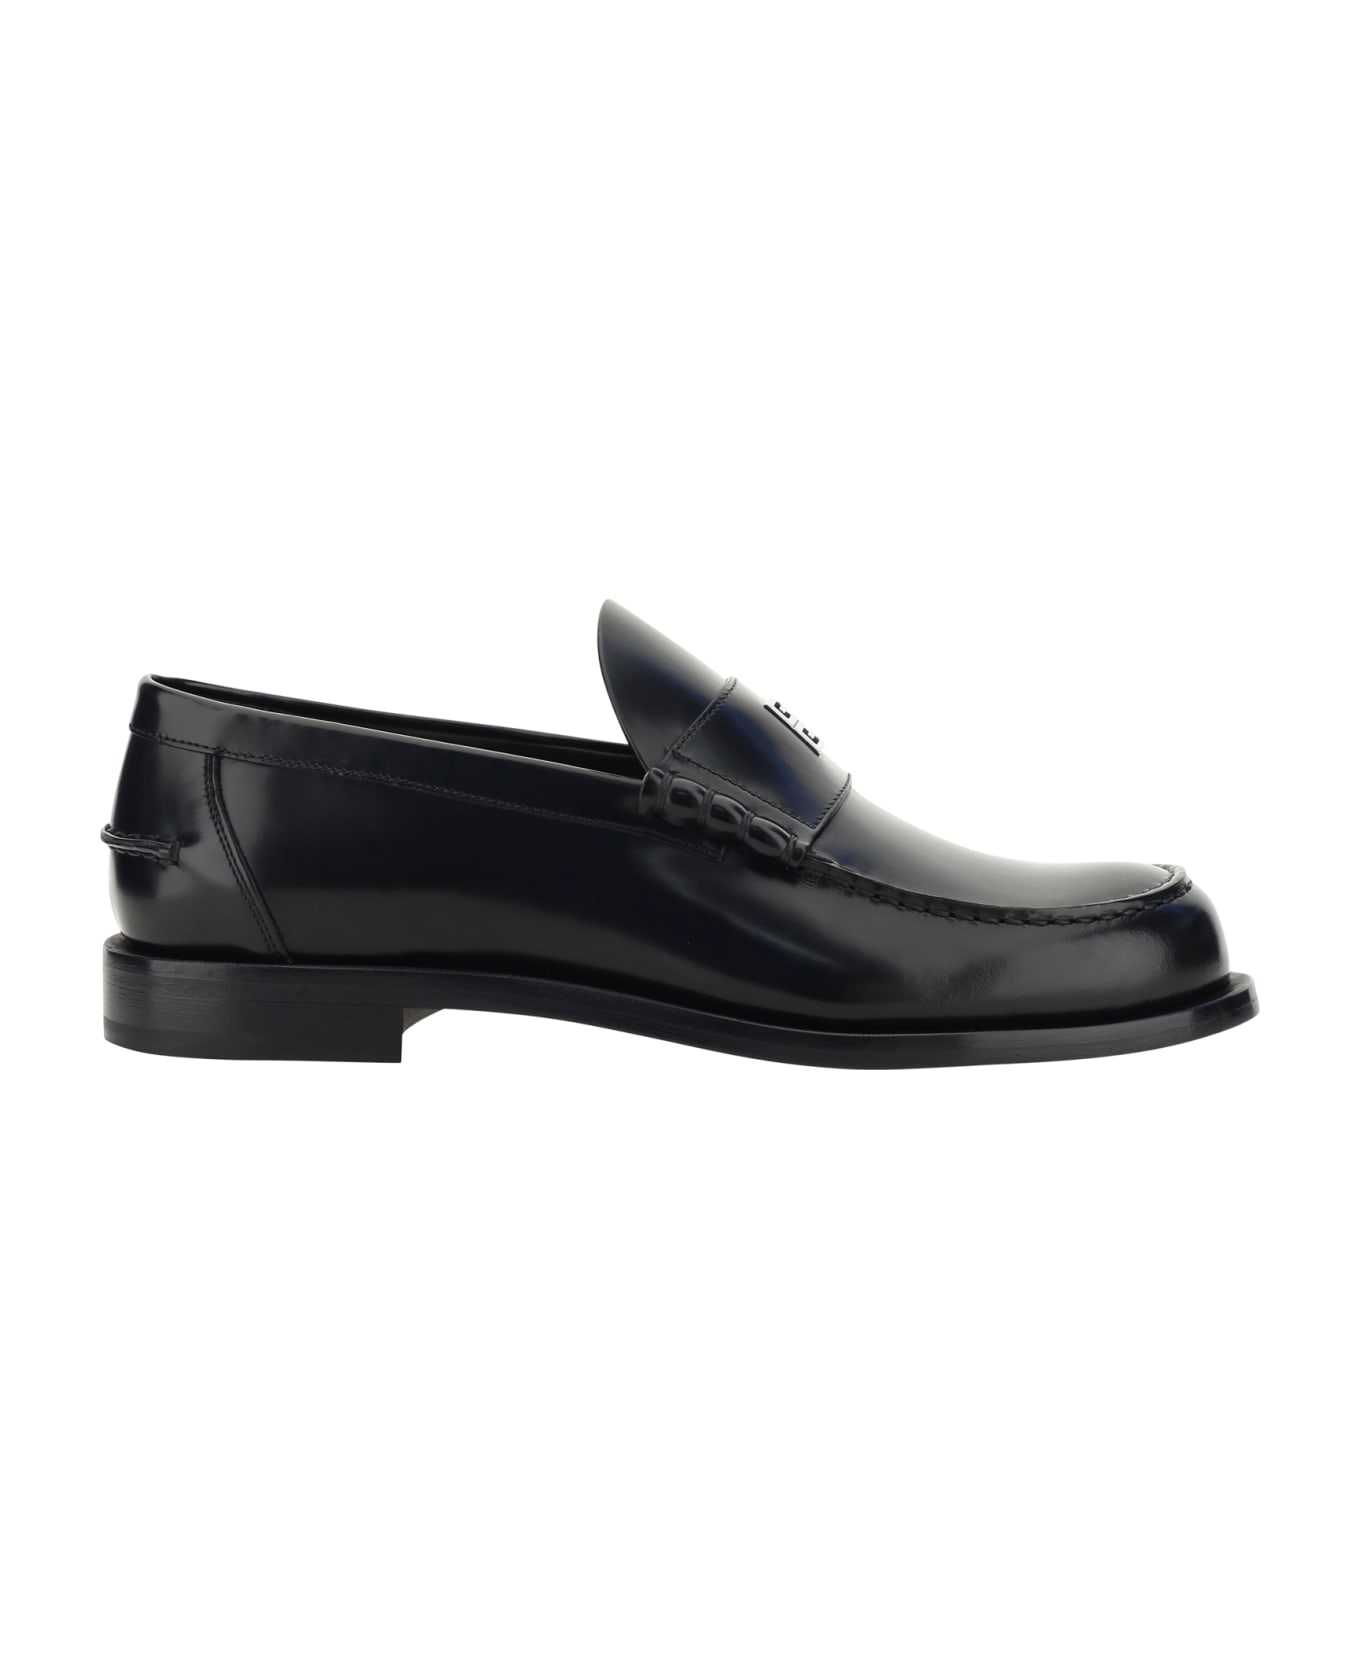 Givenchy Brushed Leather Loafers - Black